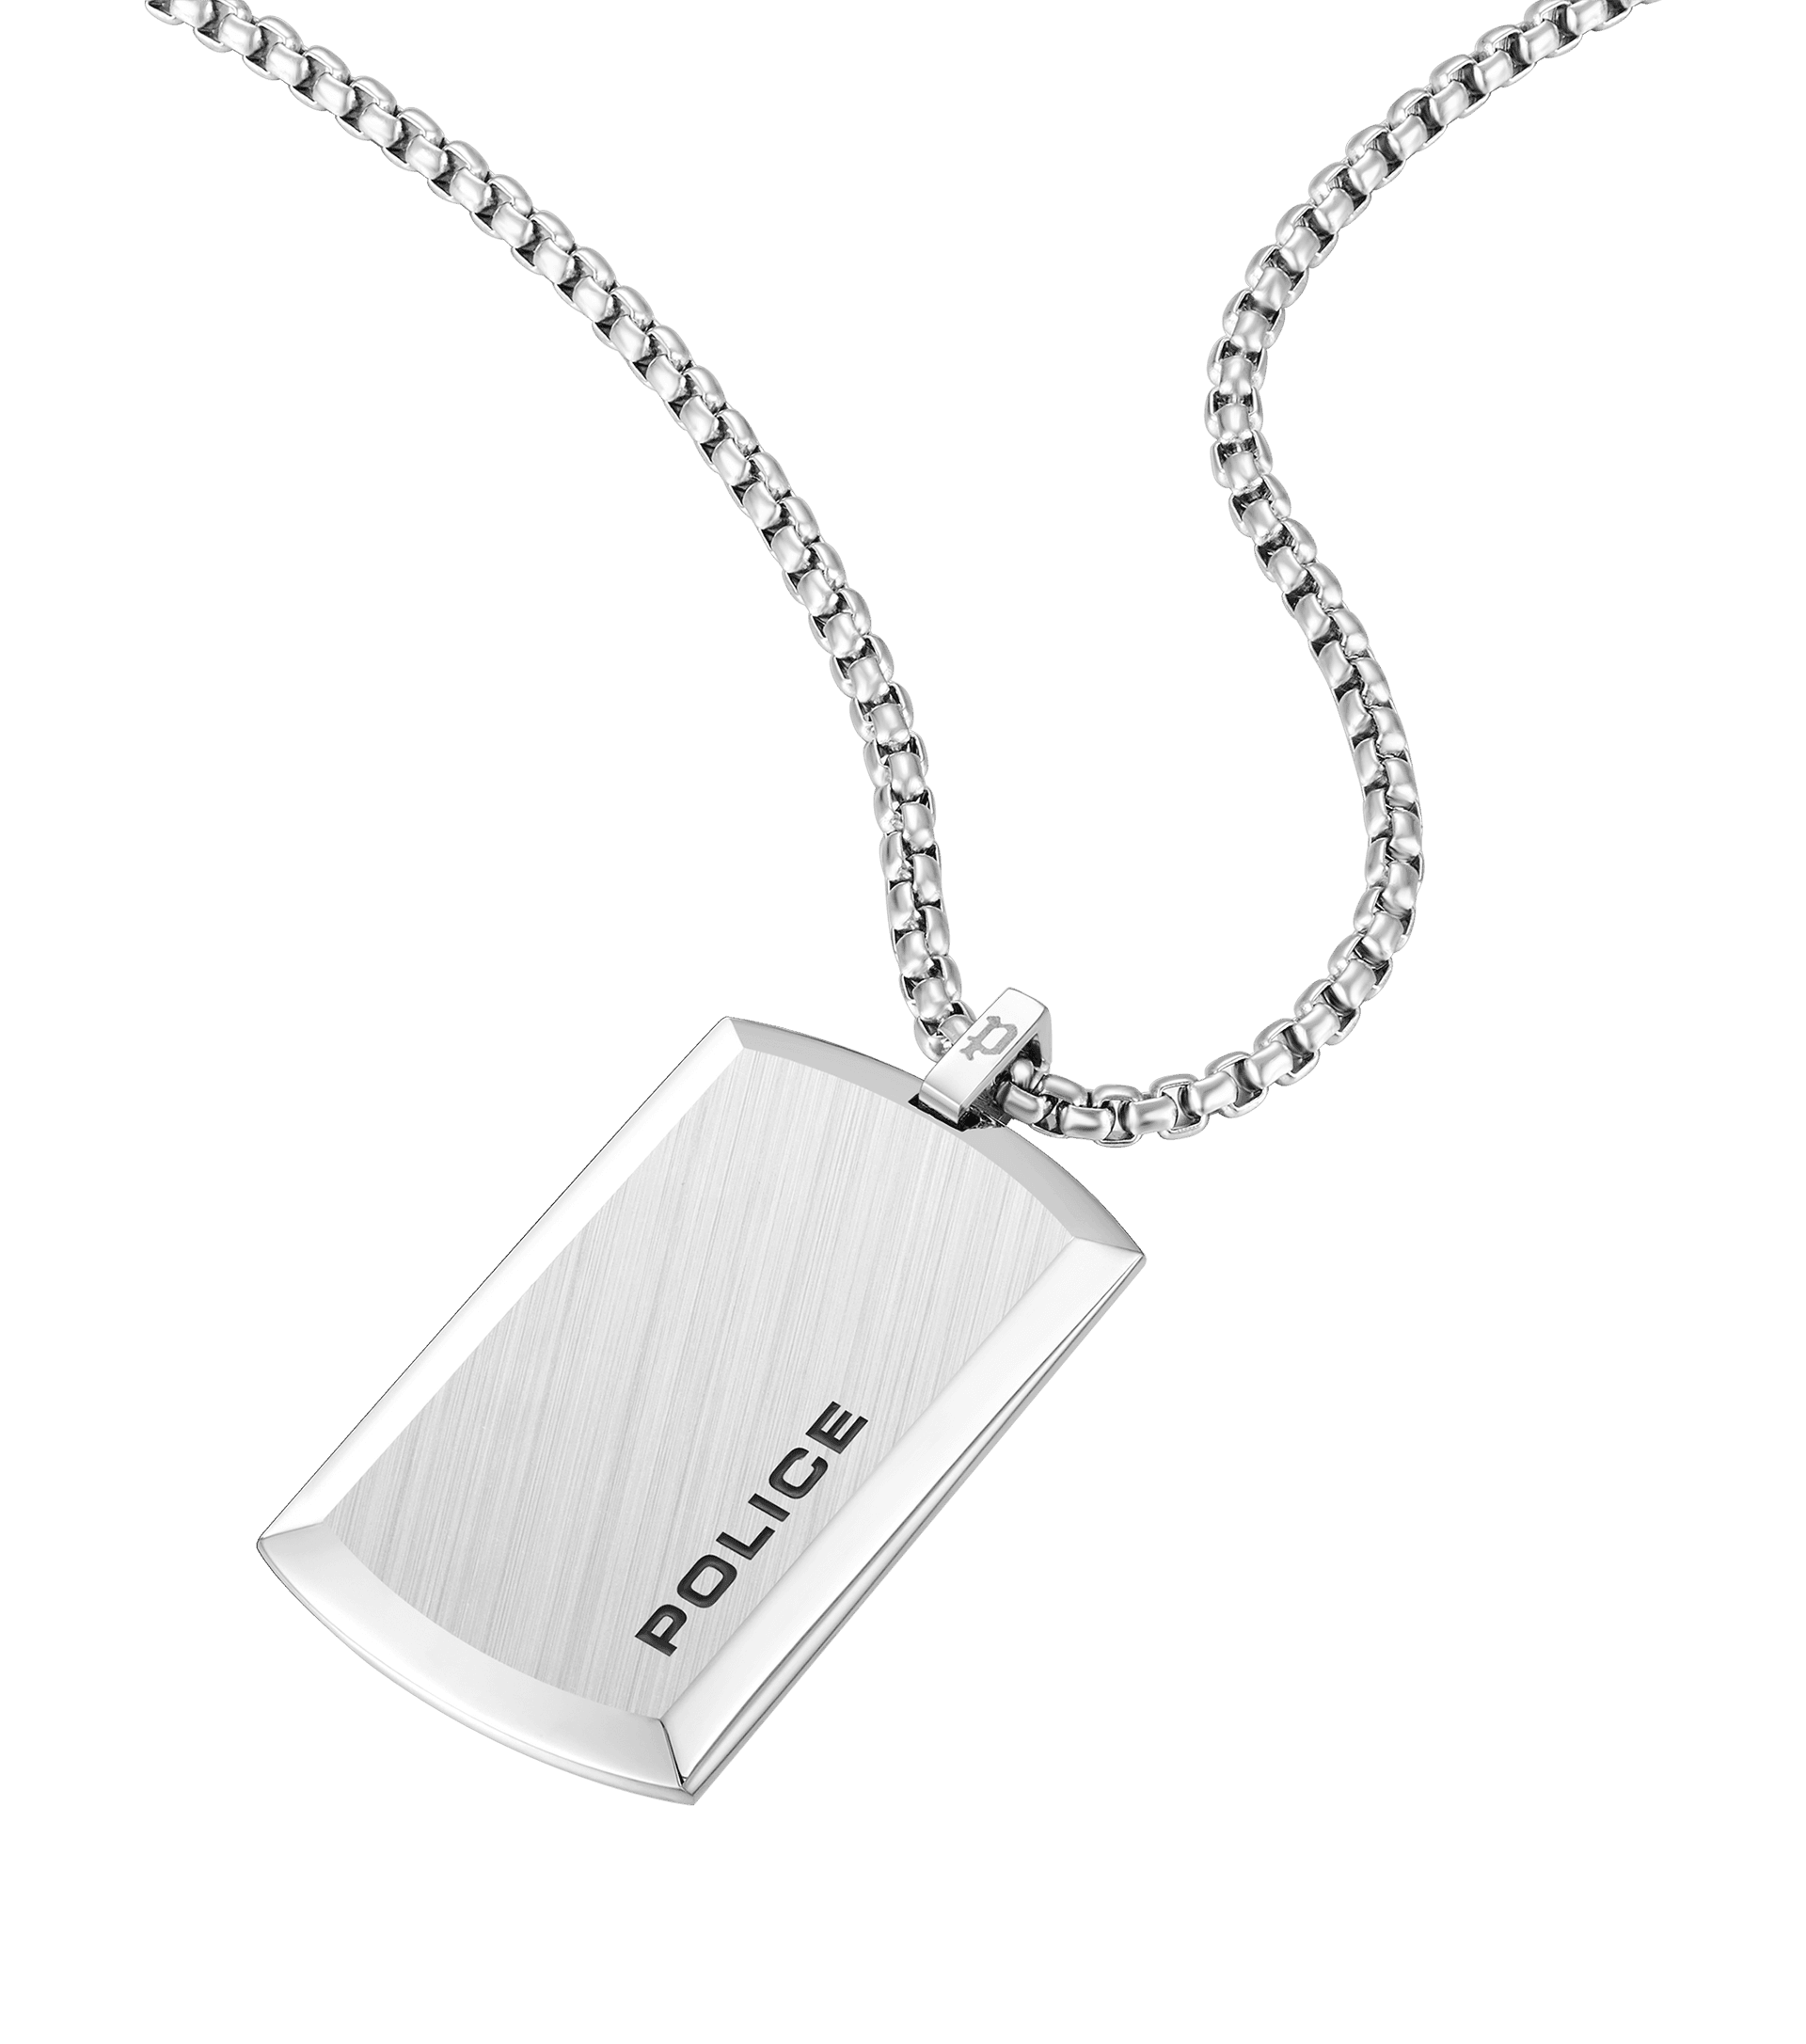 Police jewels - Purity II For Police Men PEAGN0009801 By Necklace